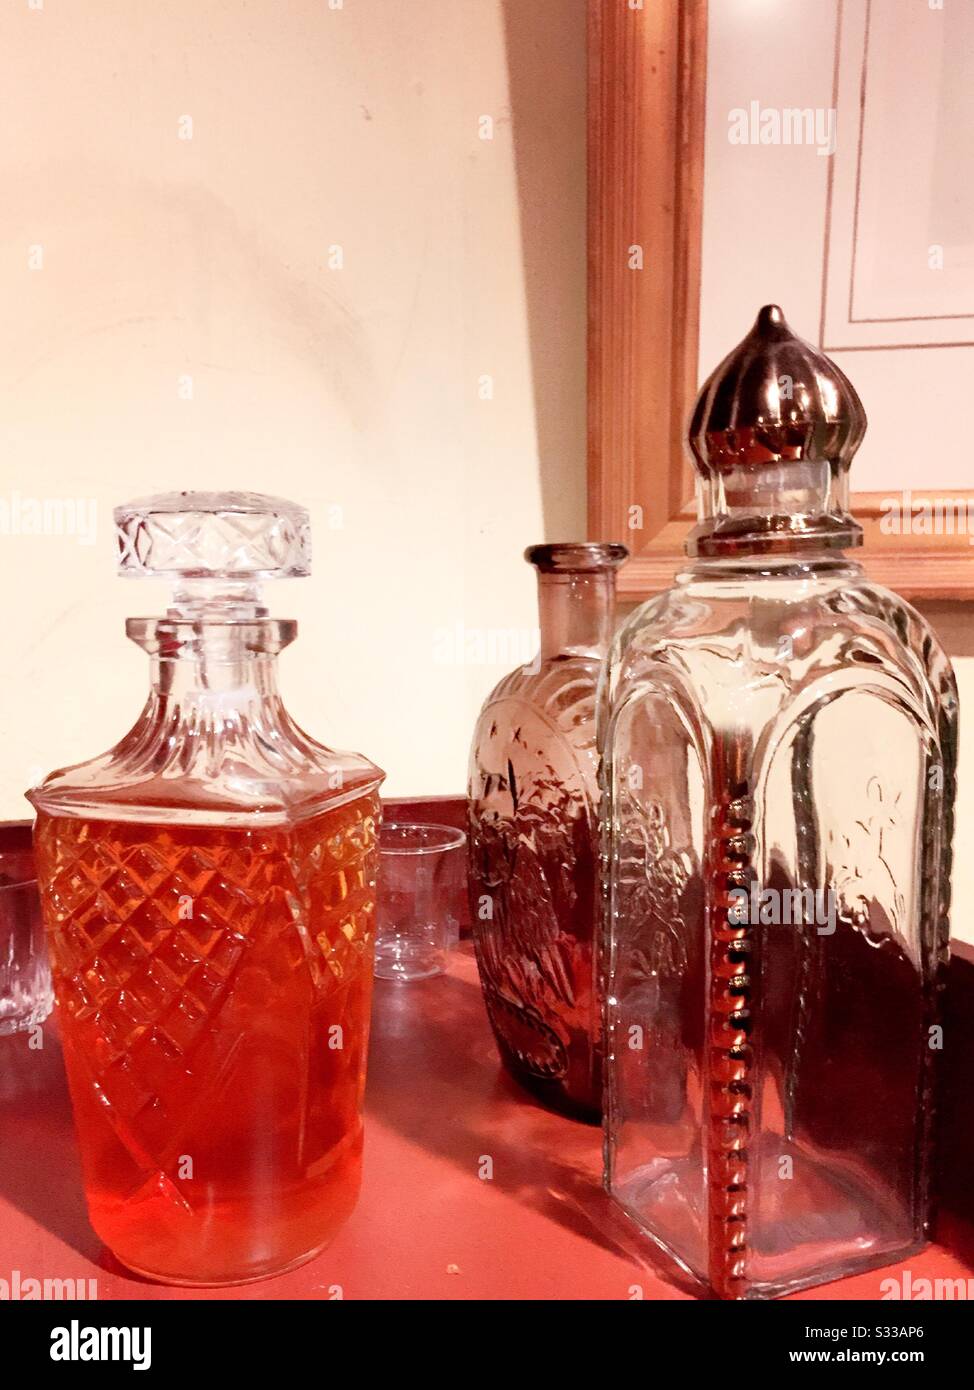 Decanters at an upscale residential bar set up Stock Photo